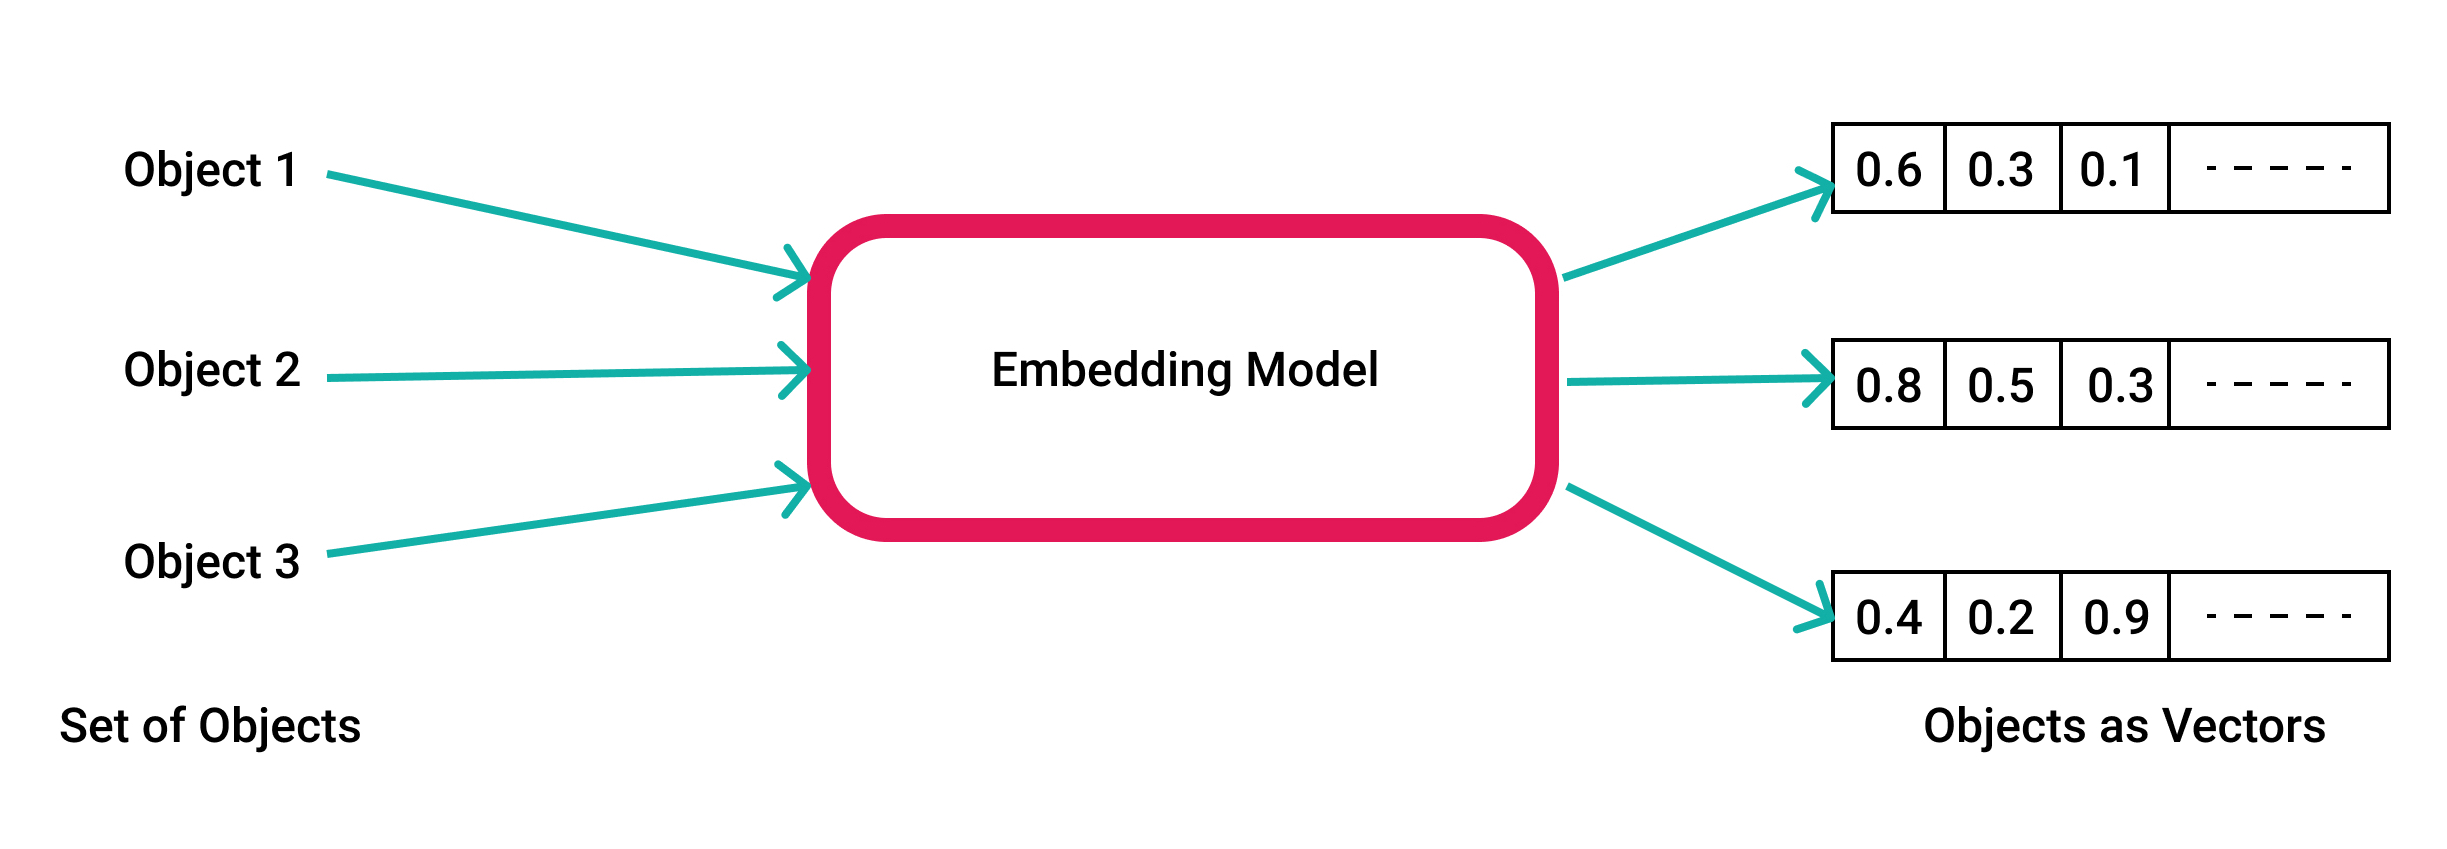 Word Embeddings and Embedding Models in Machine Learning